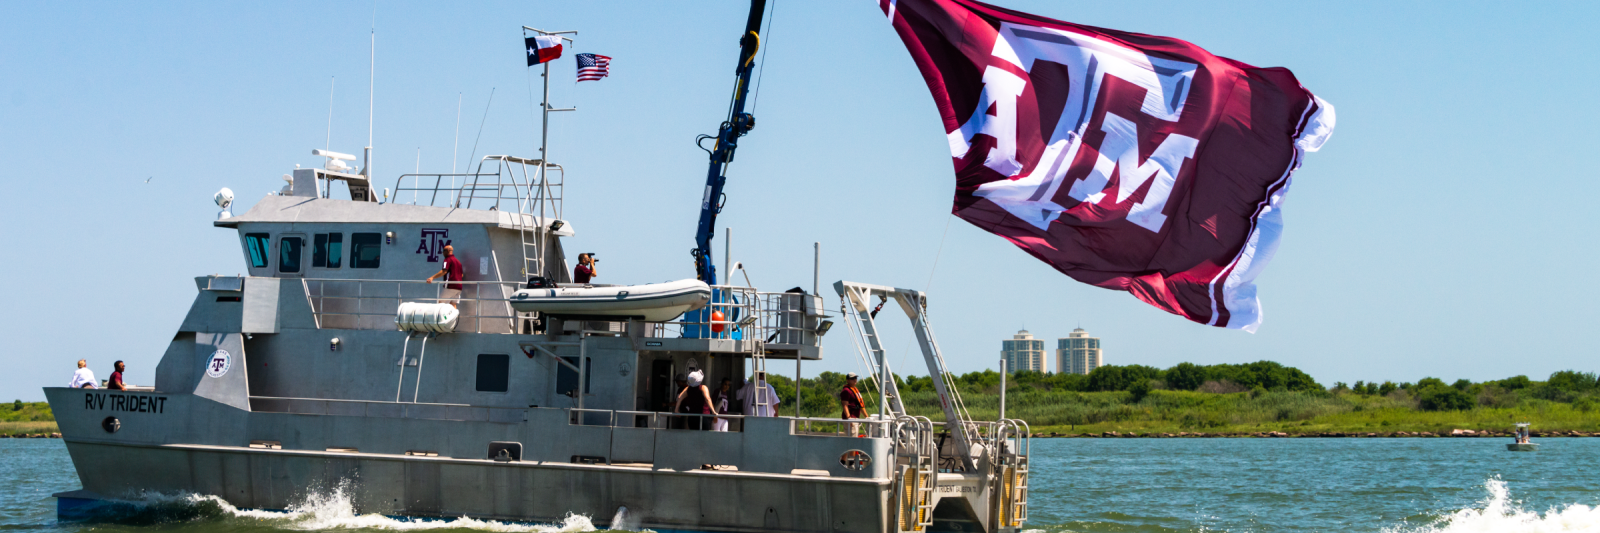 Image of research vessel with ATM flag